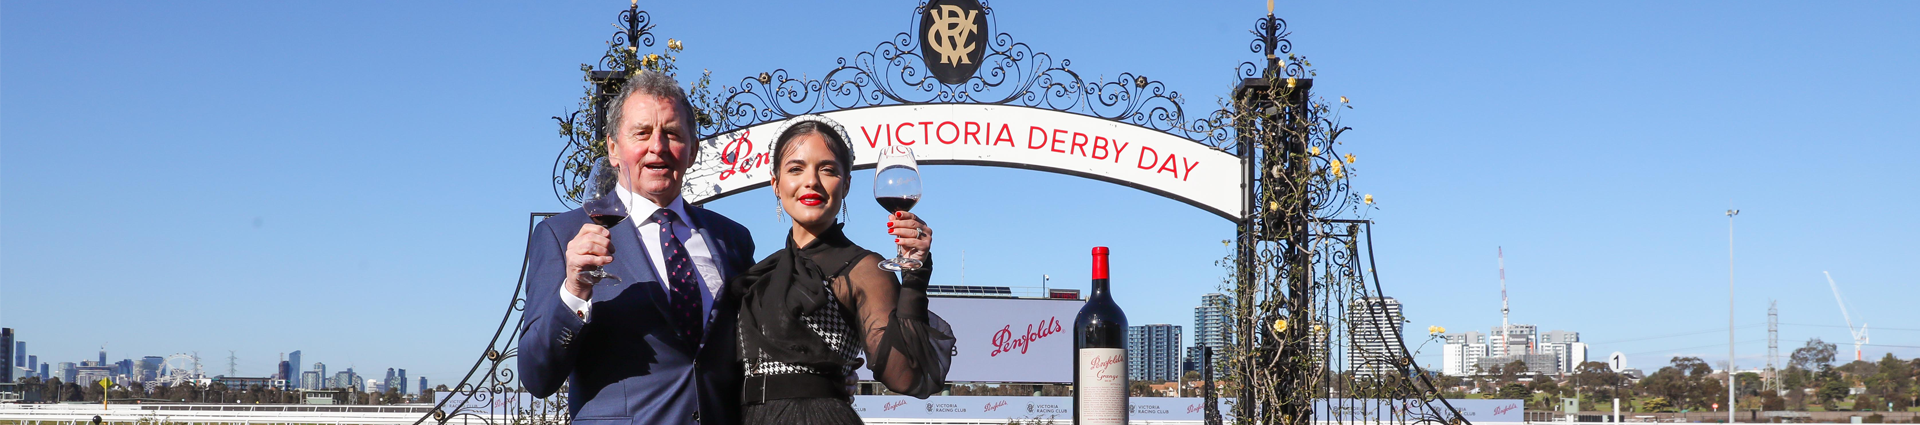 Olympia Valance toasts Penfolds Victoria Derby Day